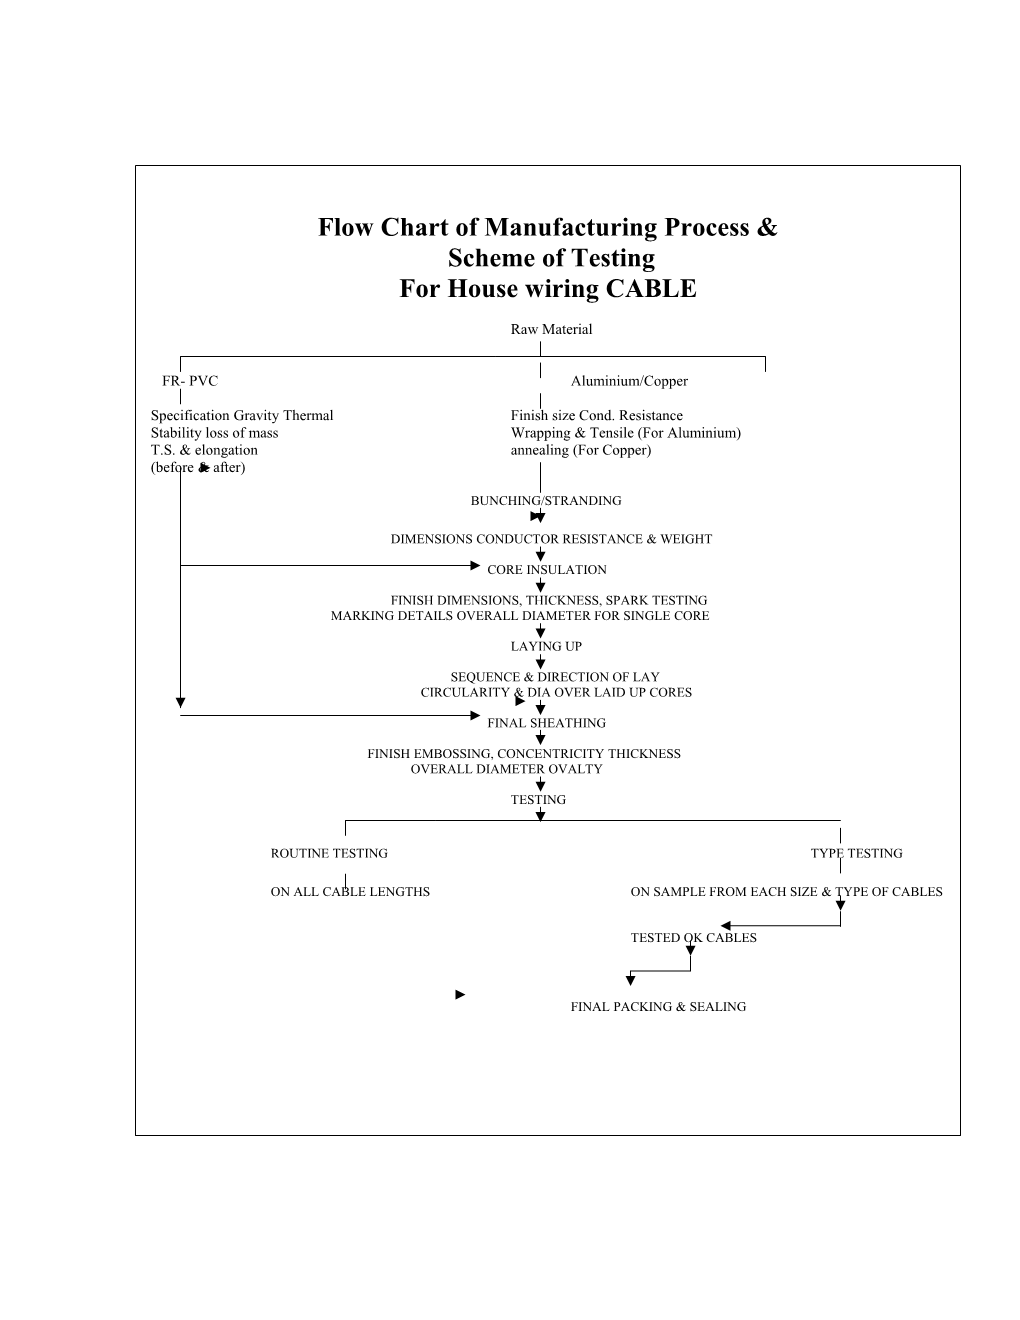 Flow Chart of Manufacturing Process & Scheme of Testing